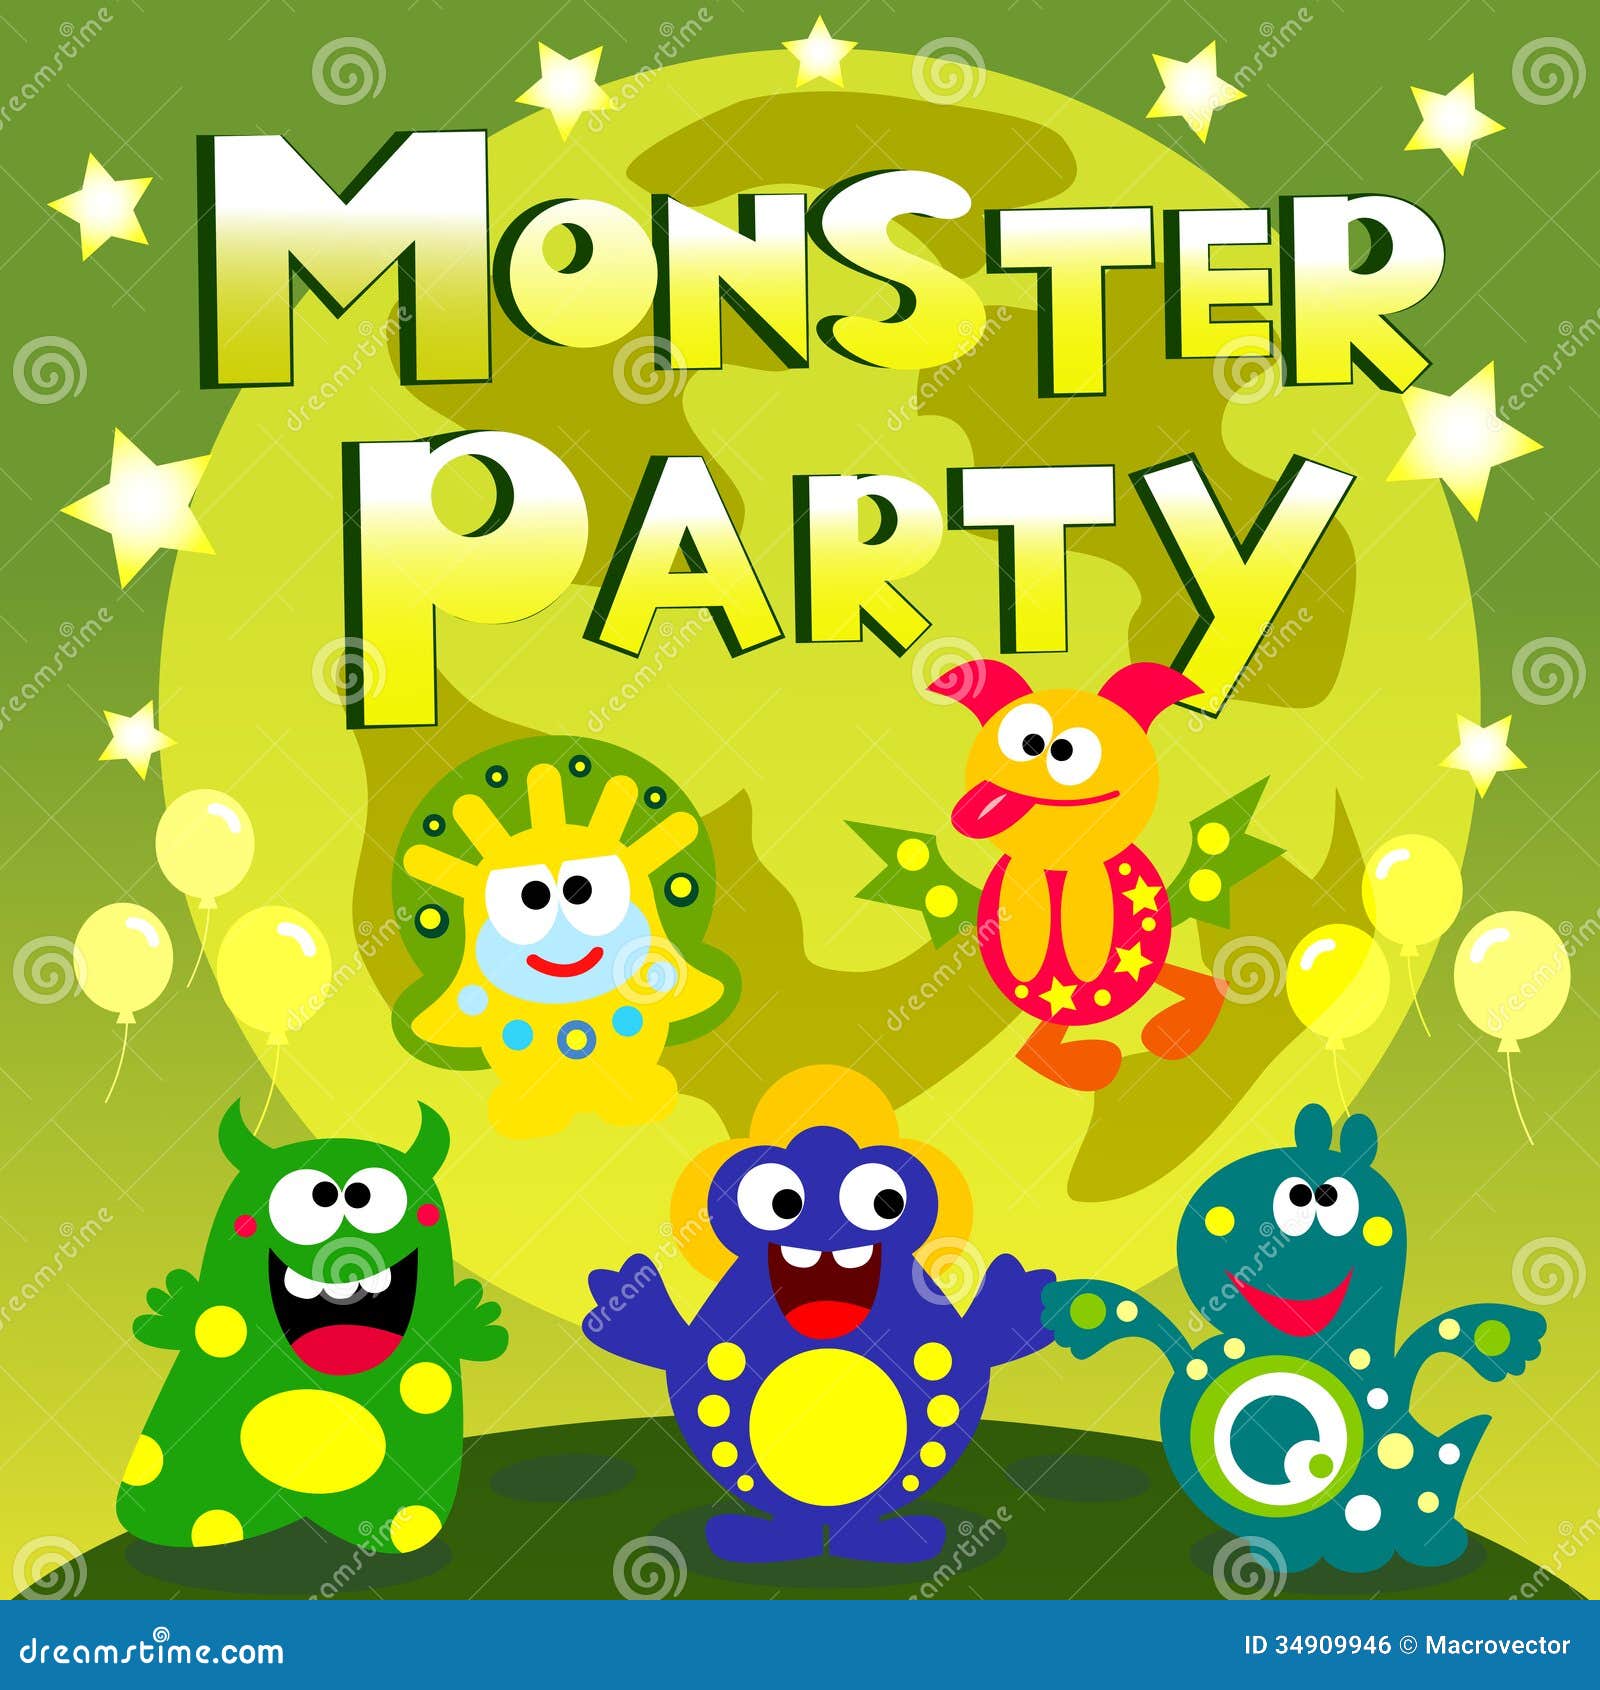 Monster Party Poster Royalty Free Stock Image - Image: 34909946